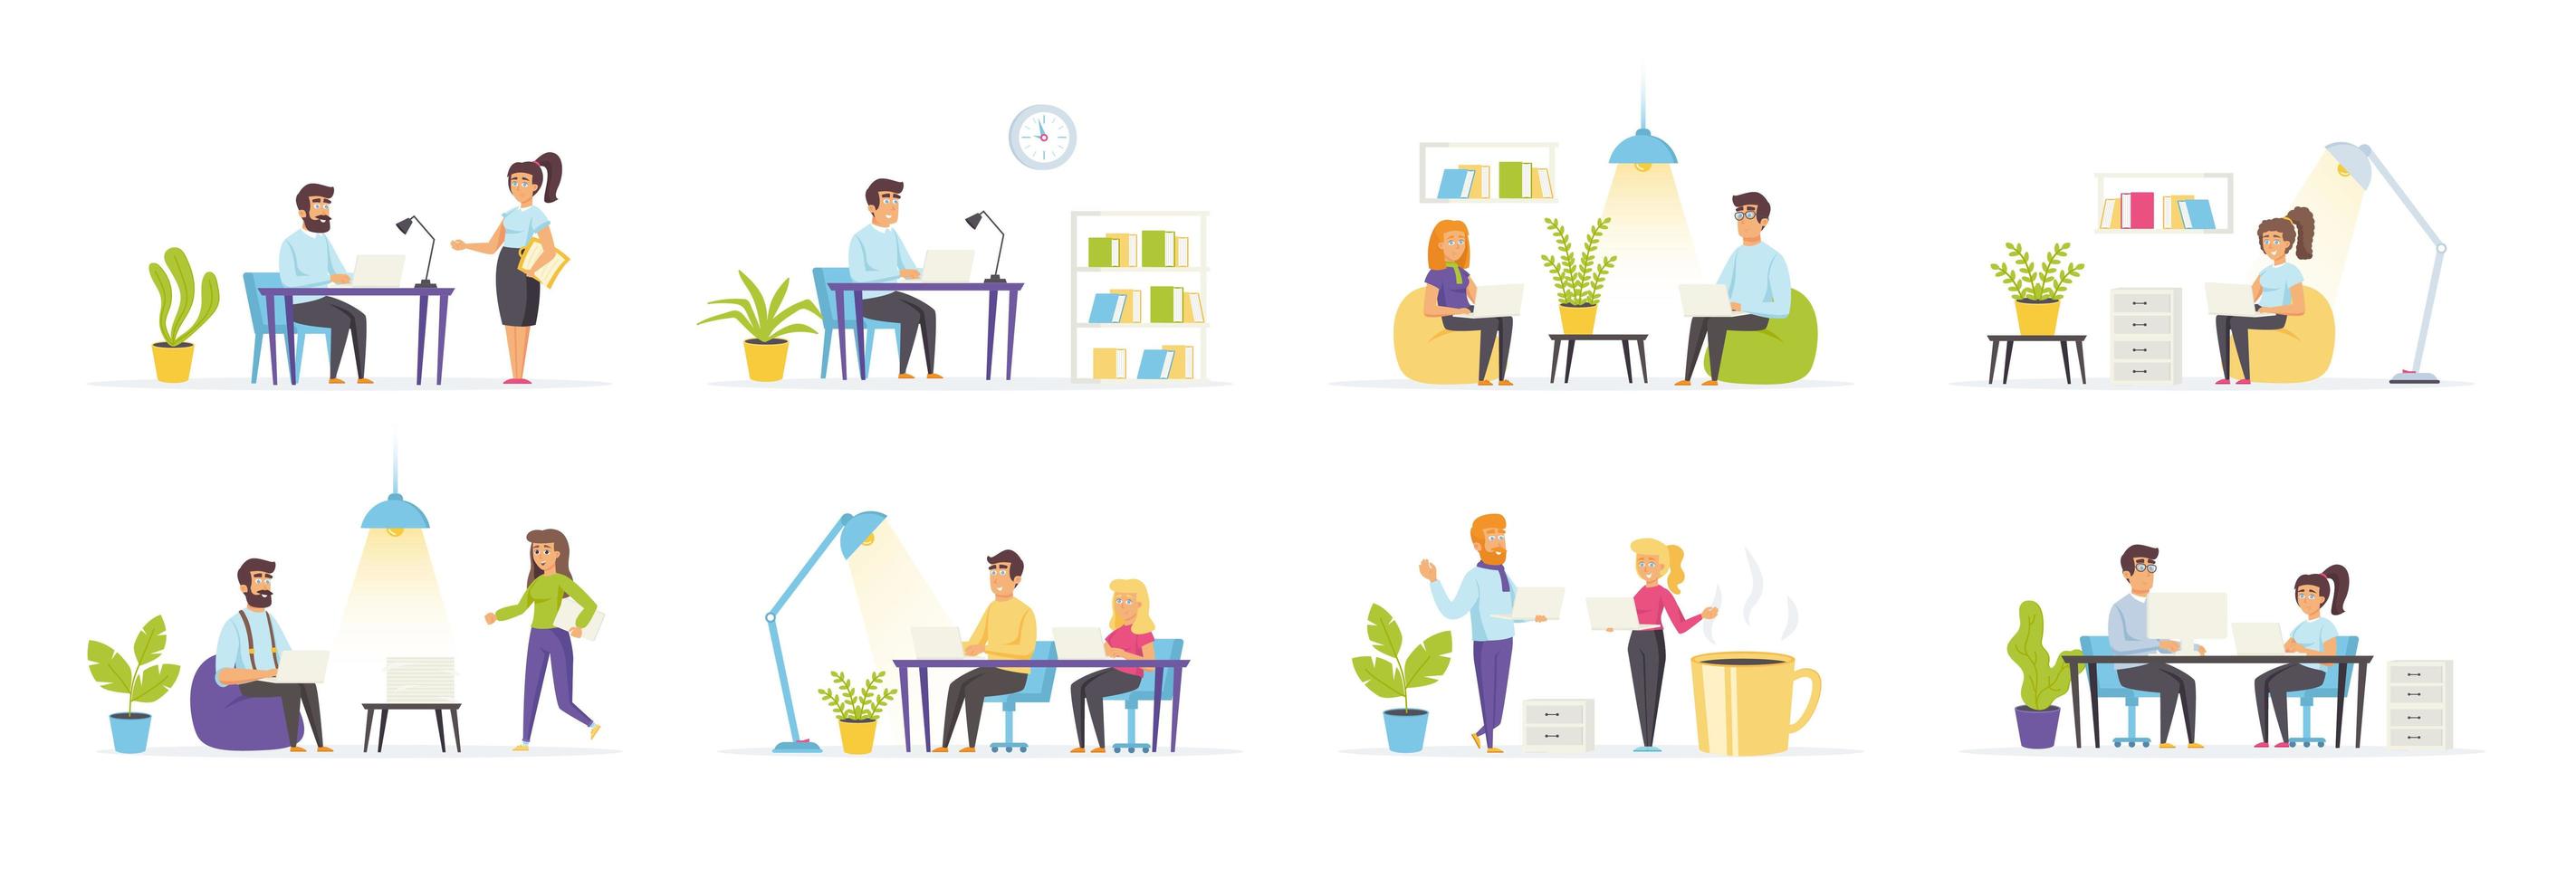 Coworking space set with people characters vector